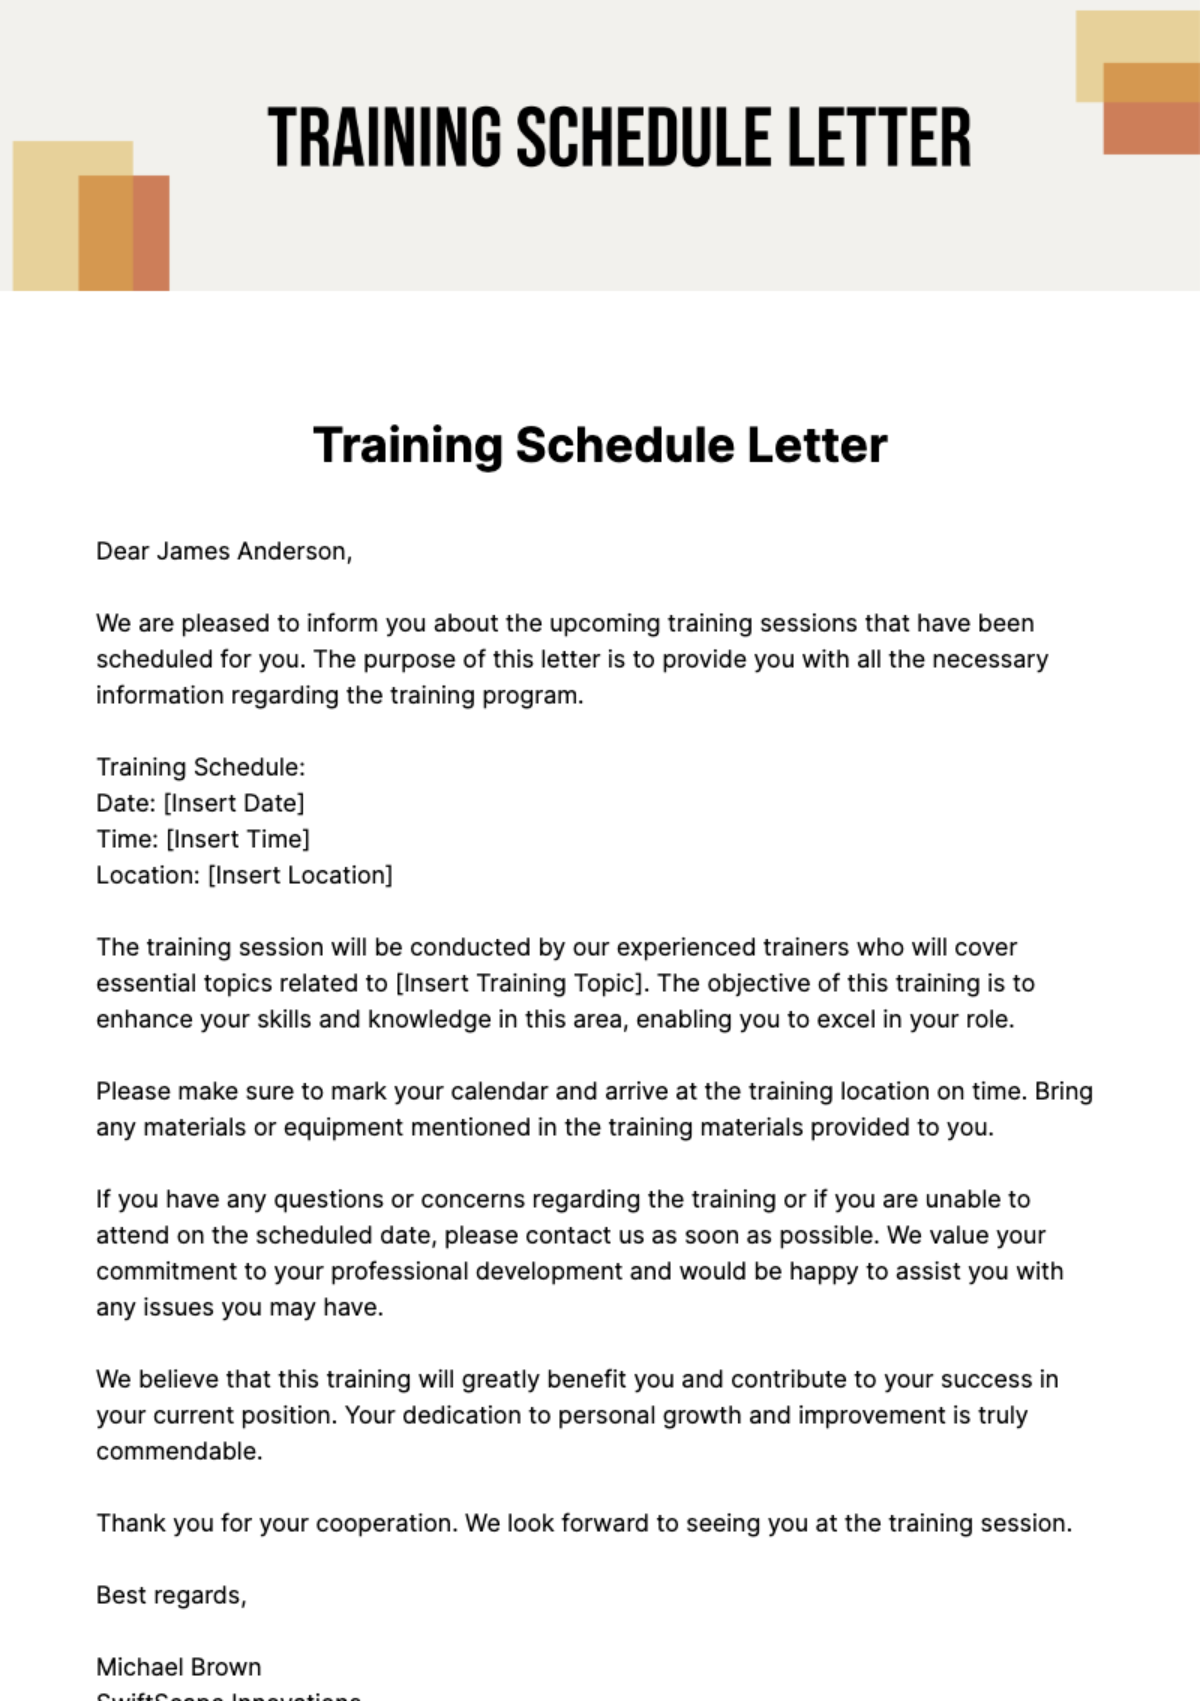 Training Schedule Letter Template